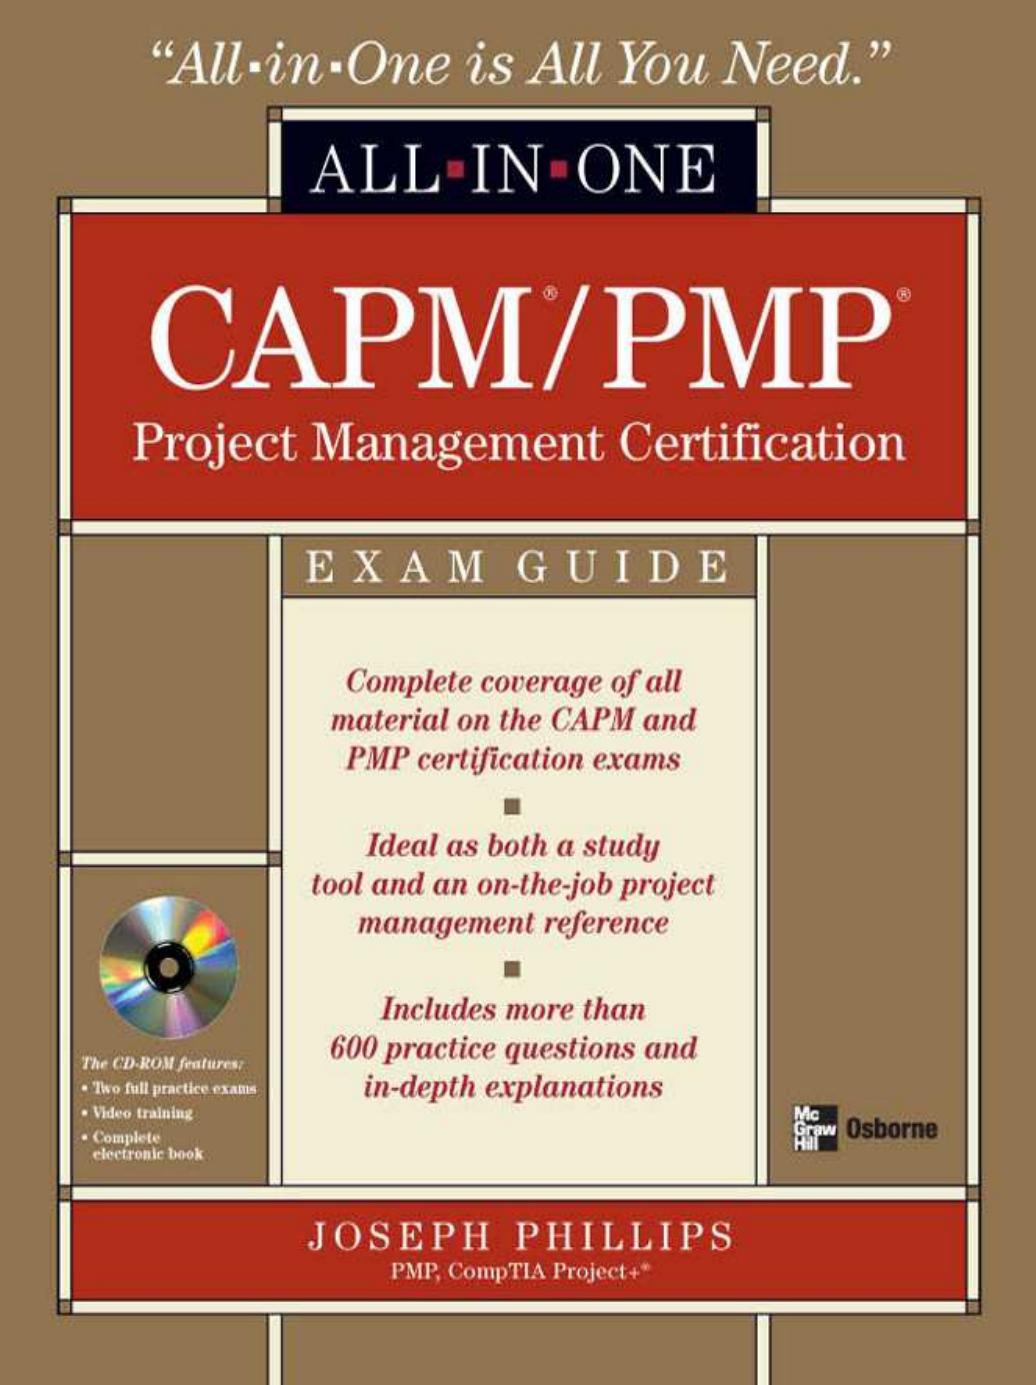 All in One CAPM/PMP Project Management Certification: Exan Guide